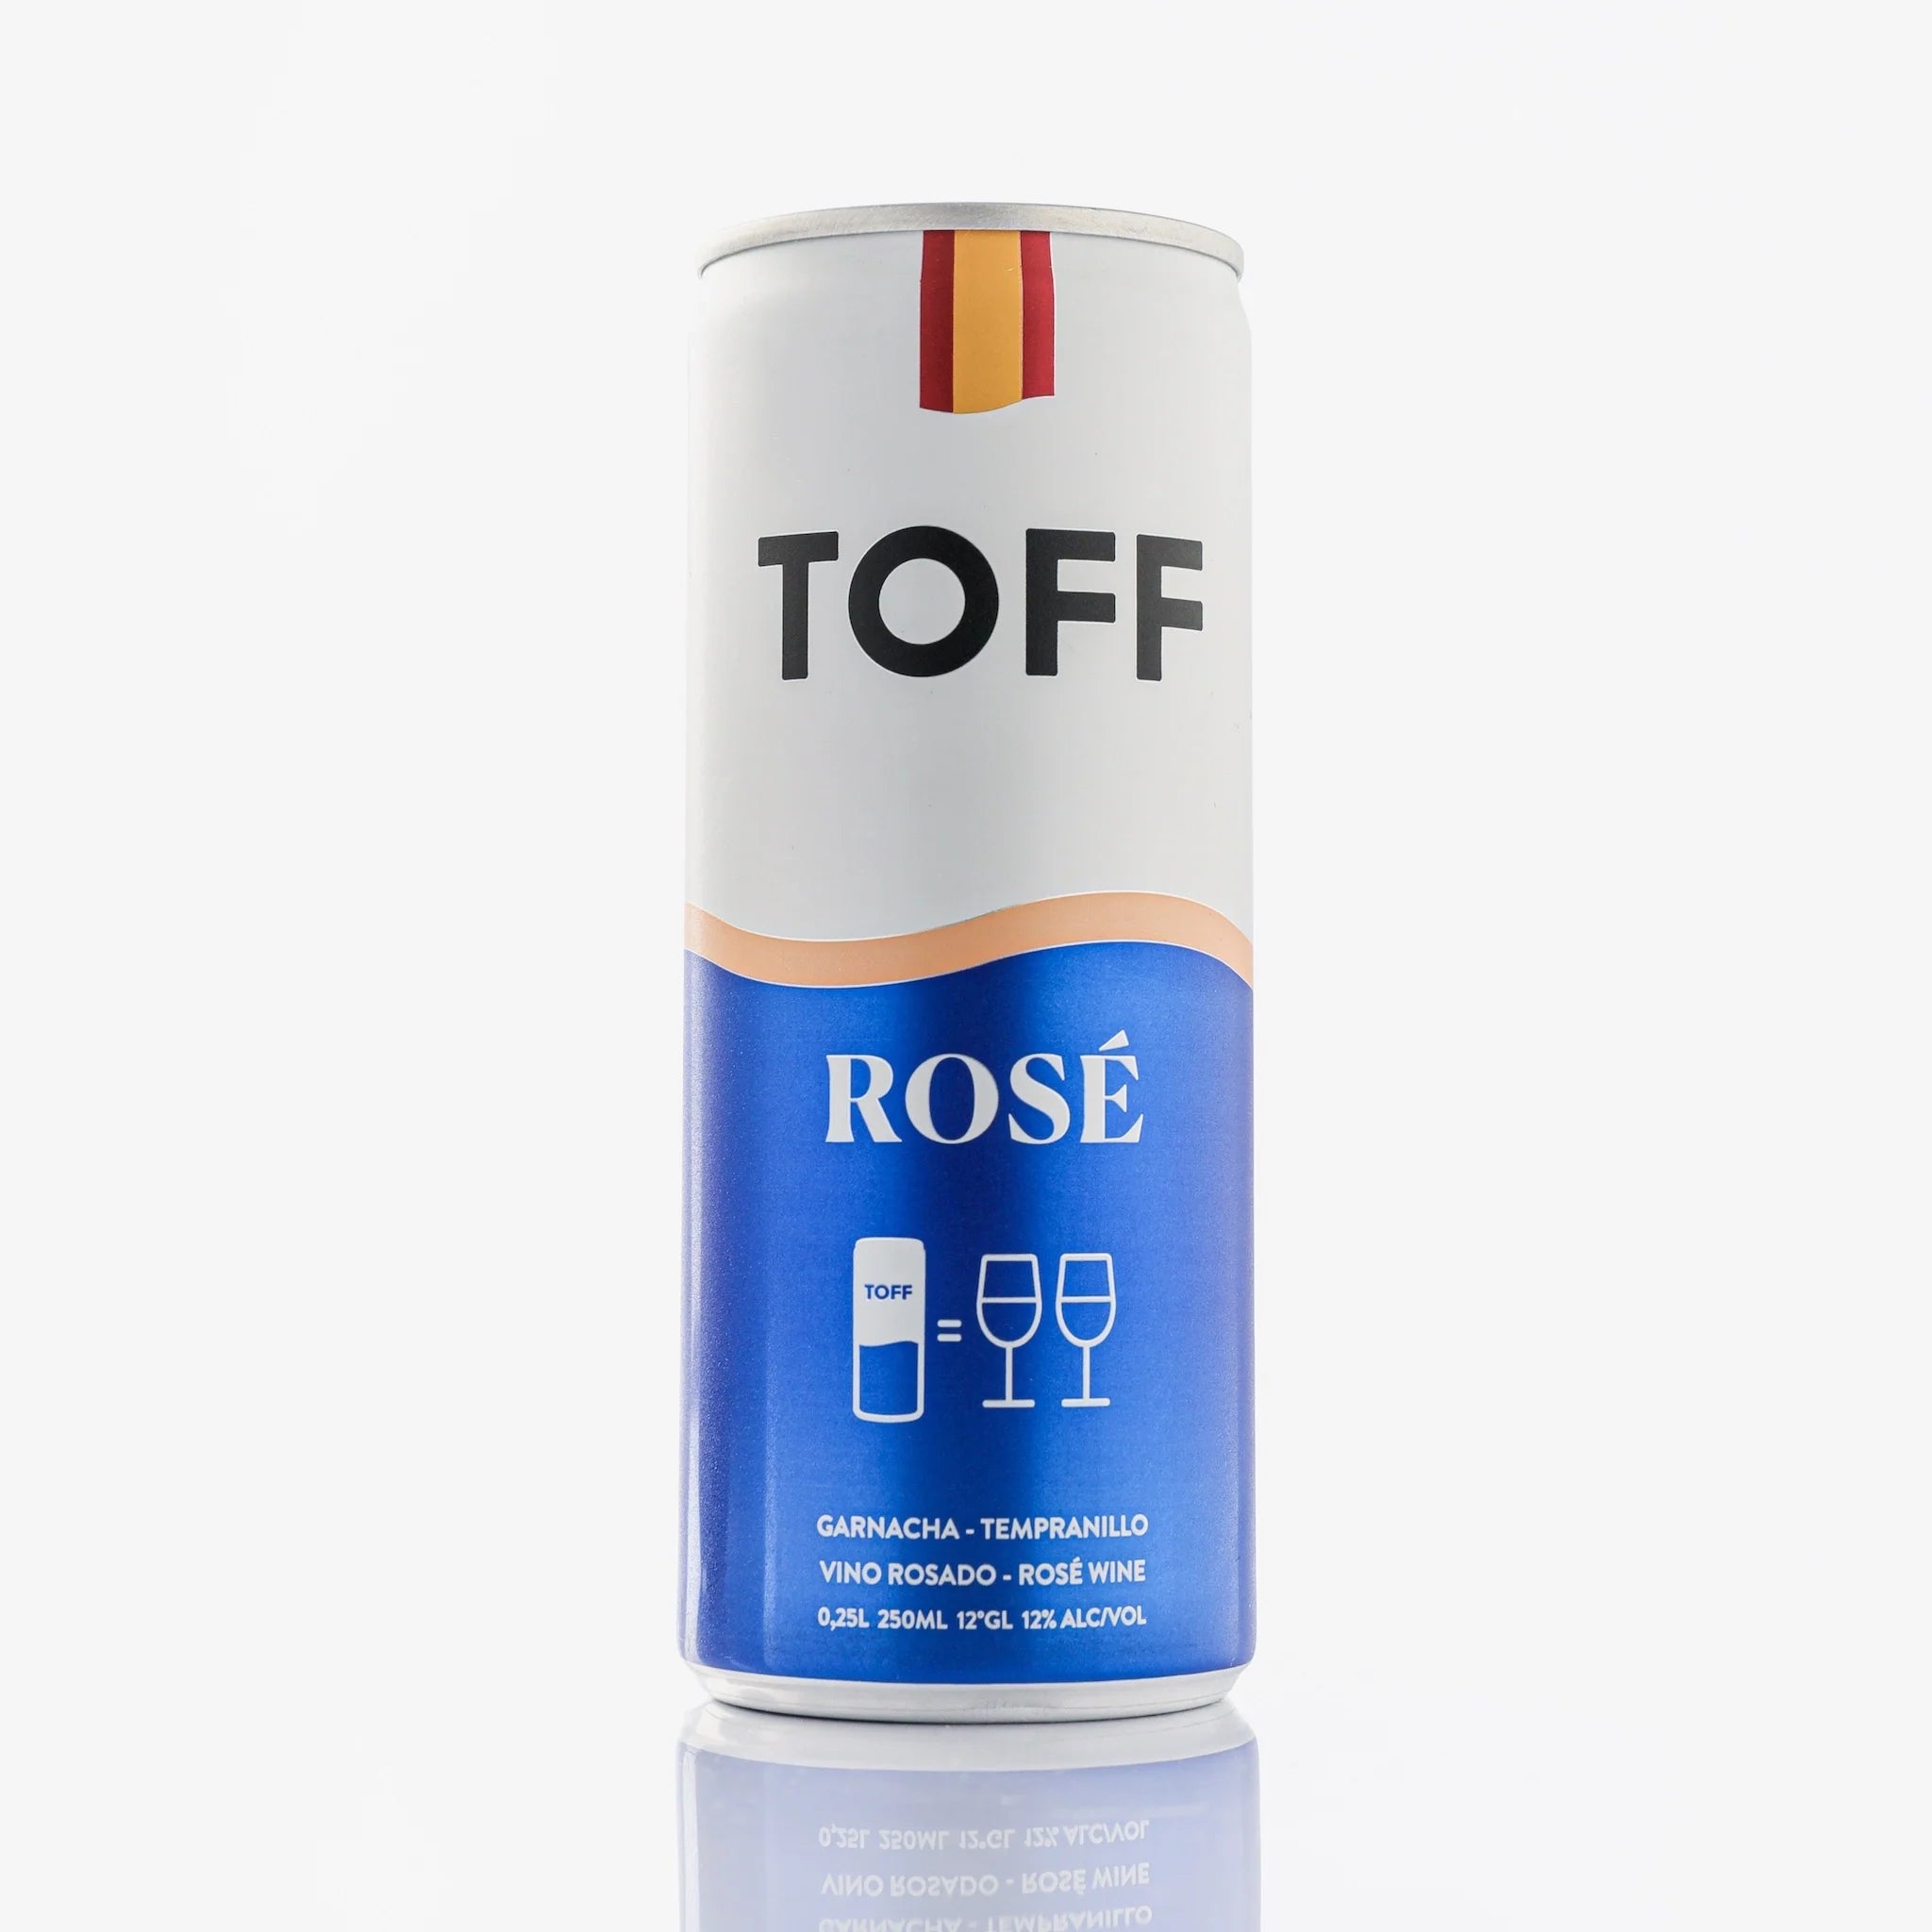 TOFF Rose Wine in a can ( 4X250ml)